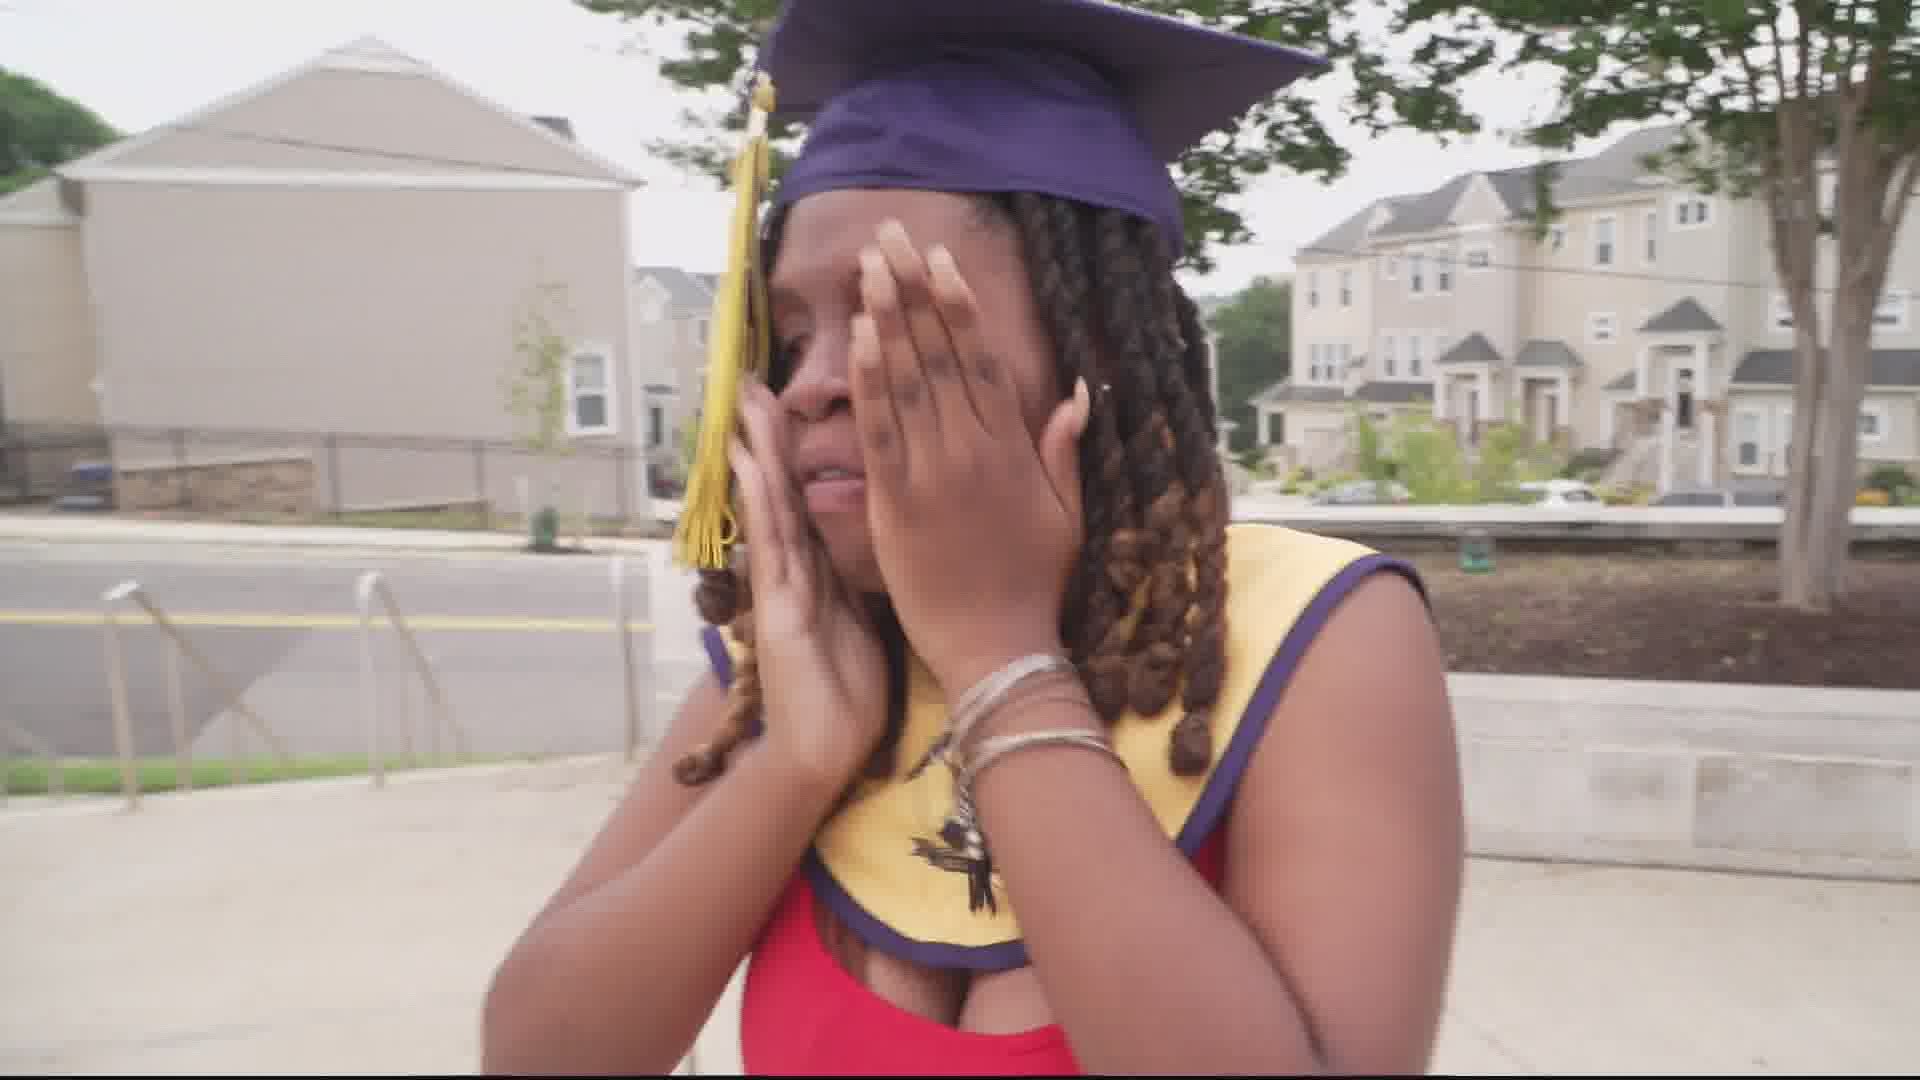 When WUSA9's Impact team learned that a pandemic upended her long-awaited graduation,  we sprung into action with a surprise that left her speechless.